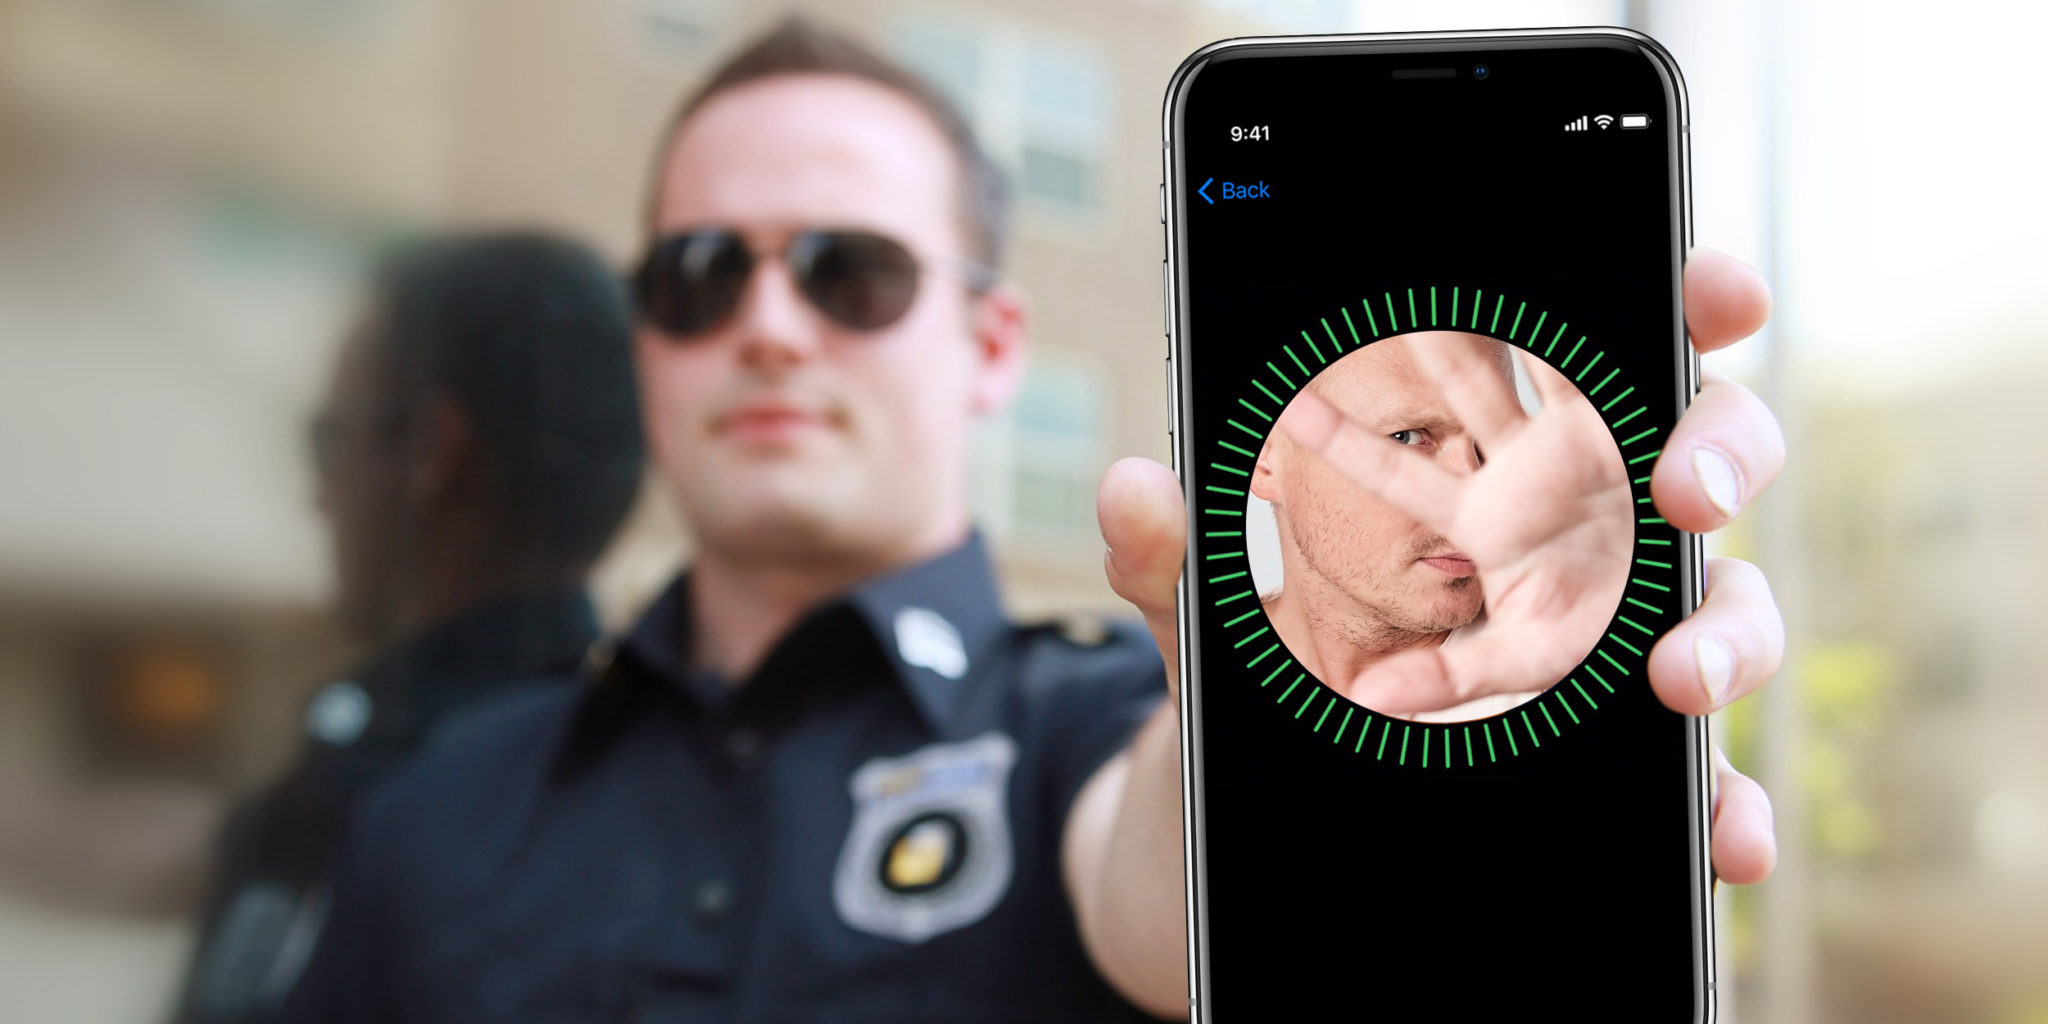 Police Facial Recognition Smartphones Will Be Used to Create Secret Watchlists2048 x 1024